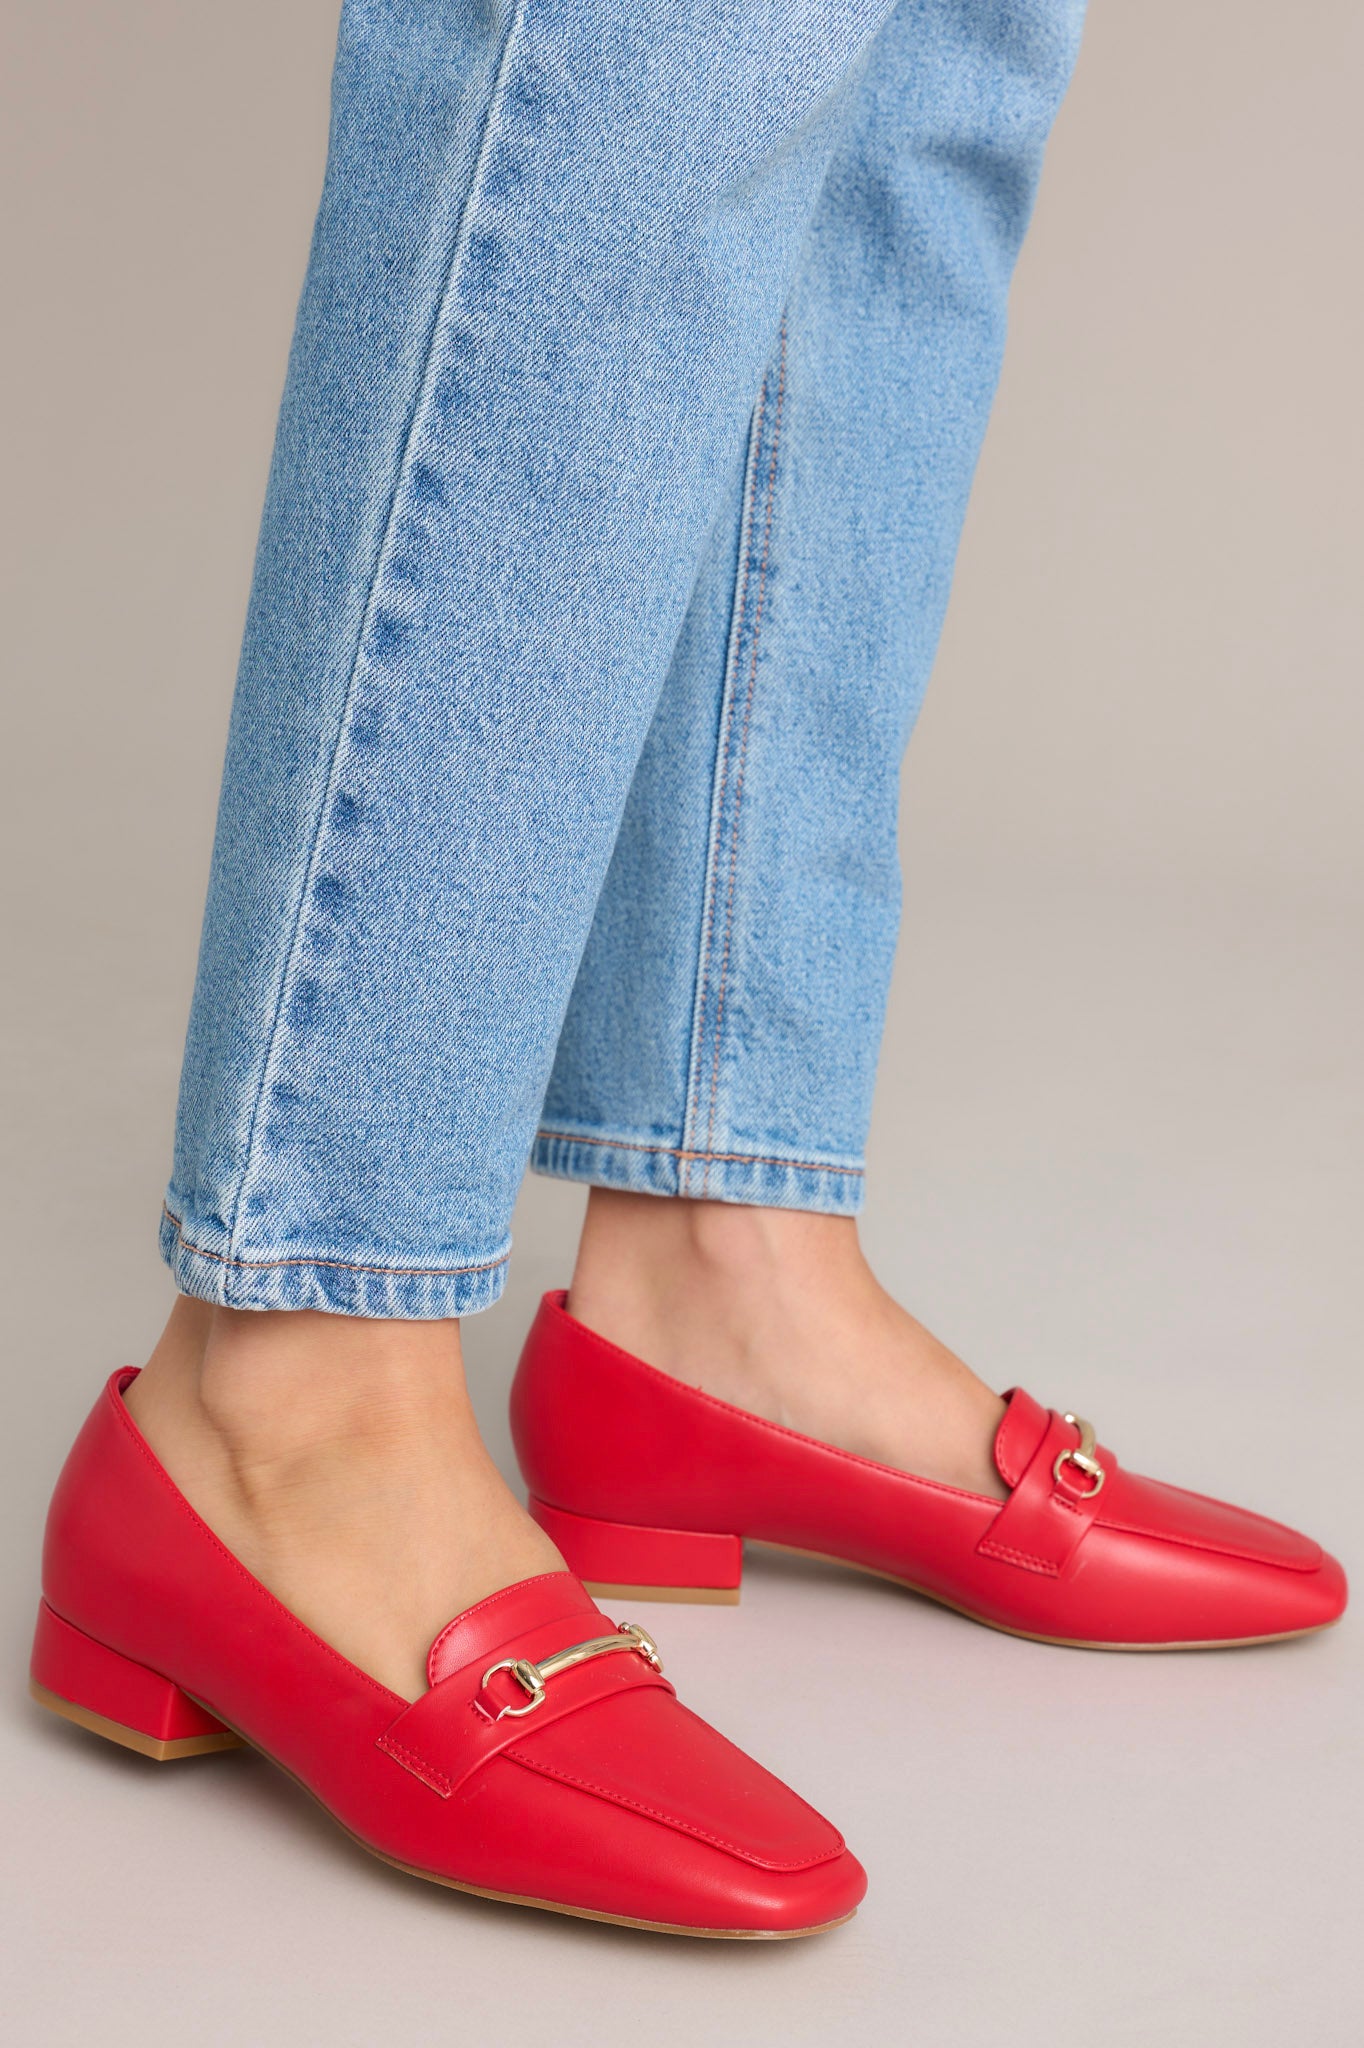 These red loafers feature a slip on design, a small heel, a square toe, and gold hardware.